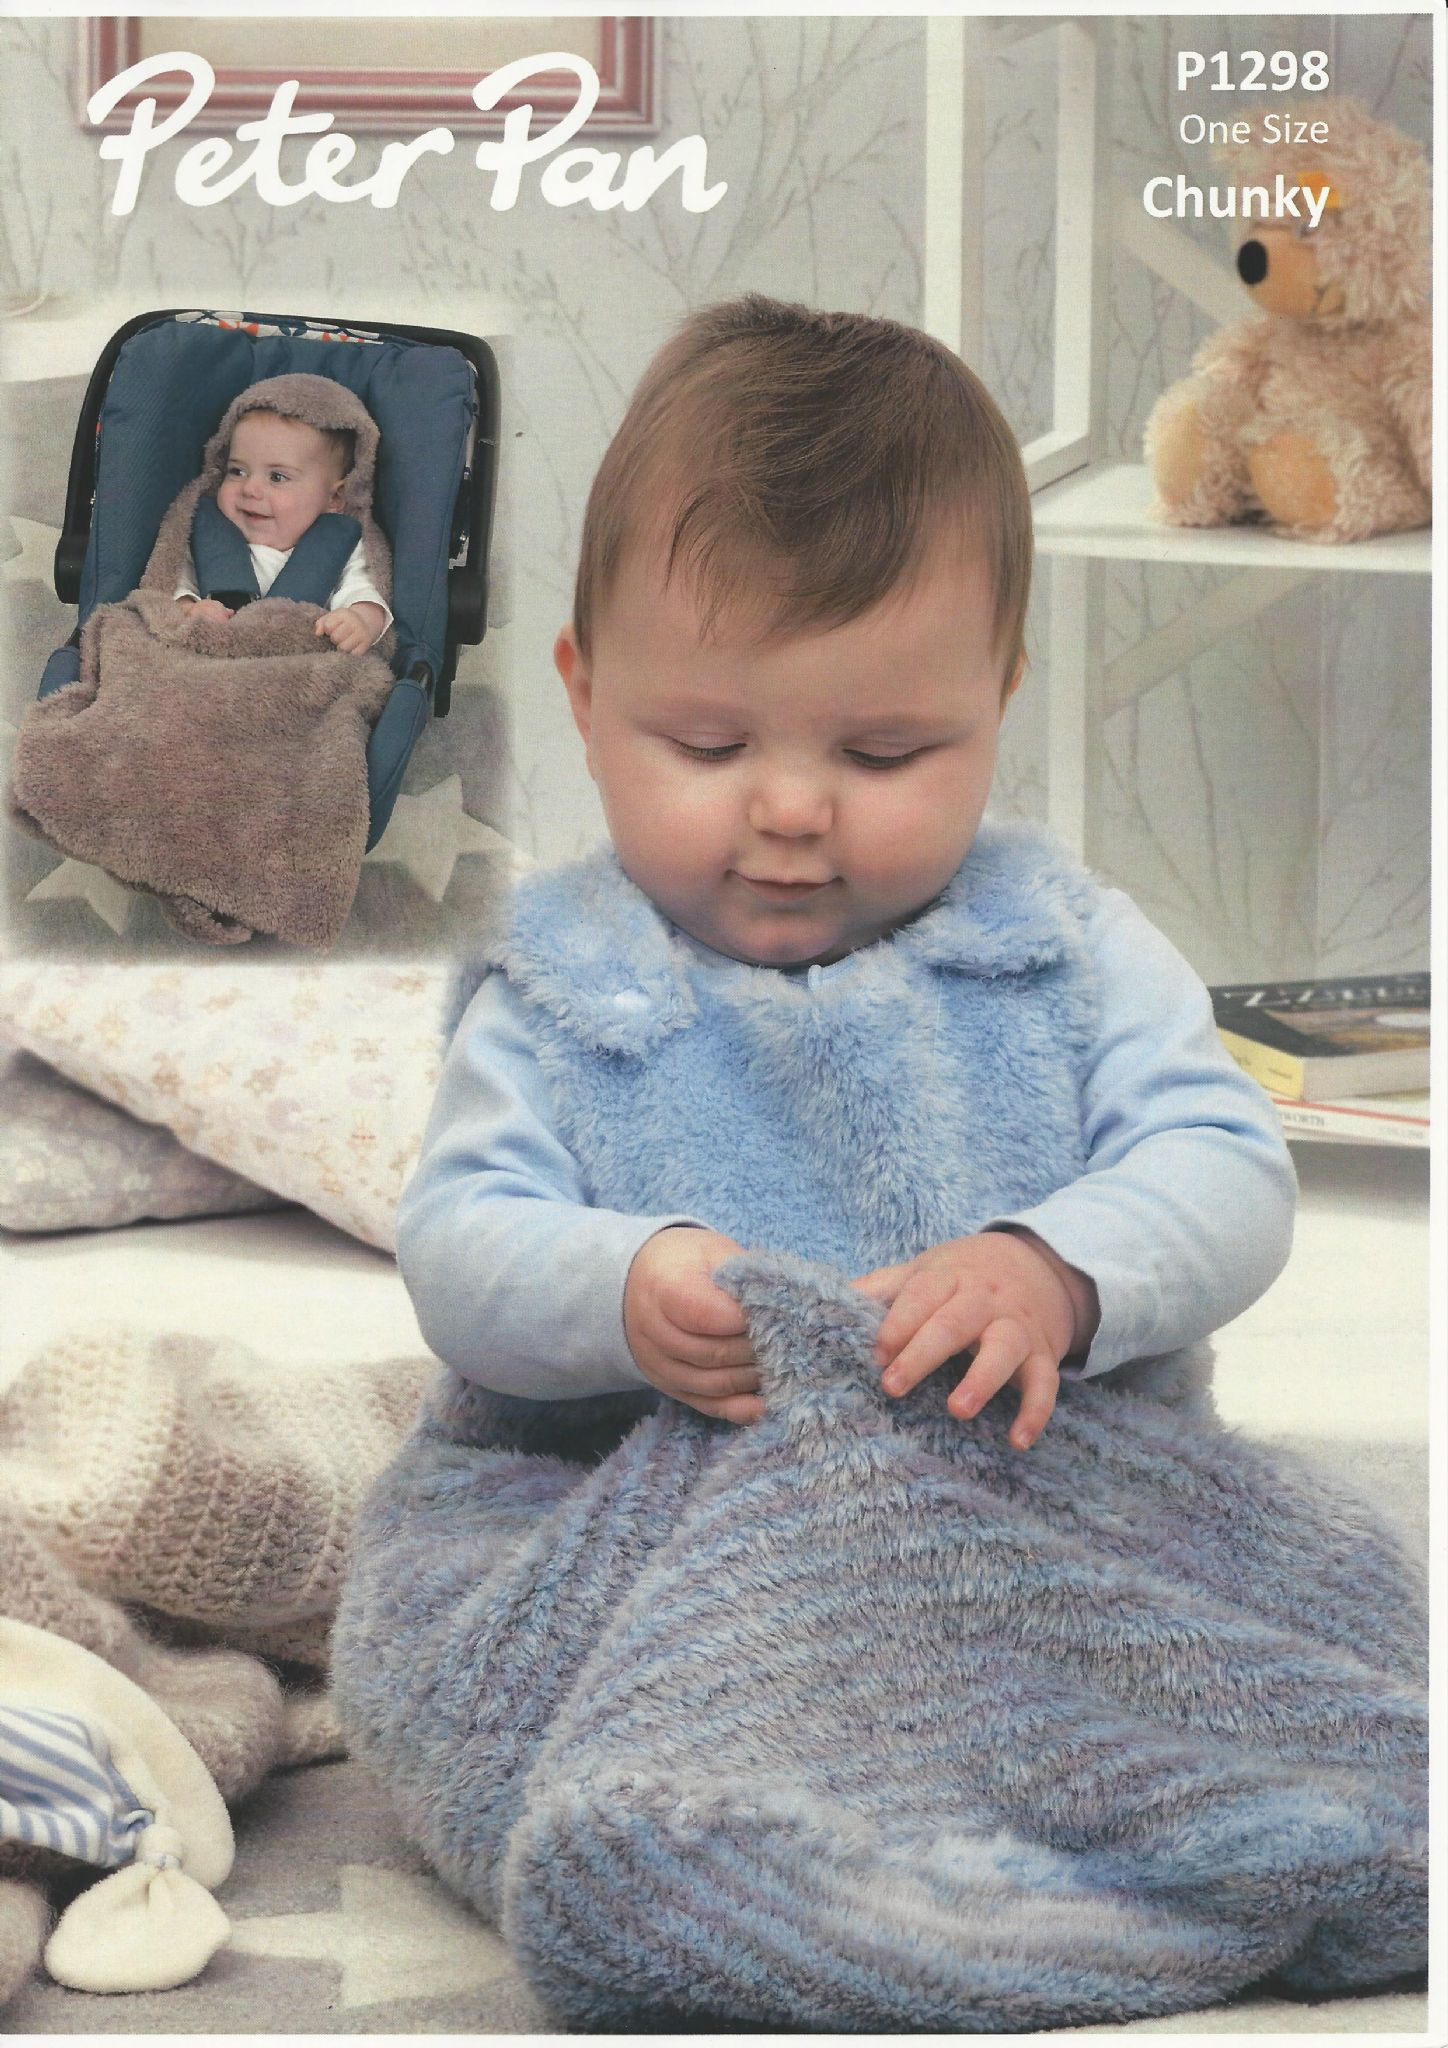 Car Seat Knitted Blanket Pattern Peter Pan Snuggle Bag And Car Seat Blanket Knitting Pattern In Precious Chunky P1298